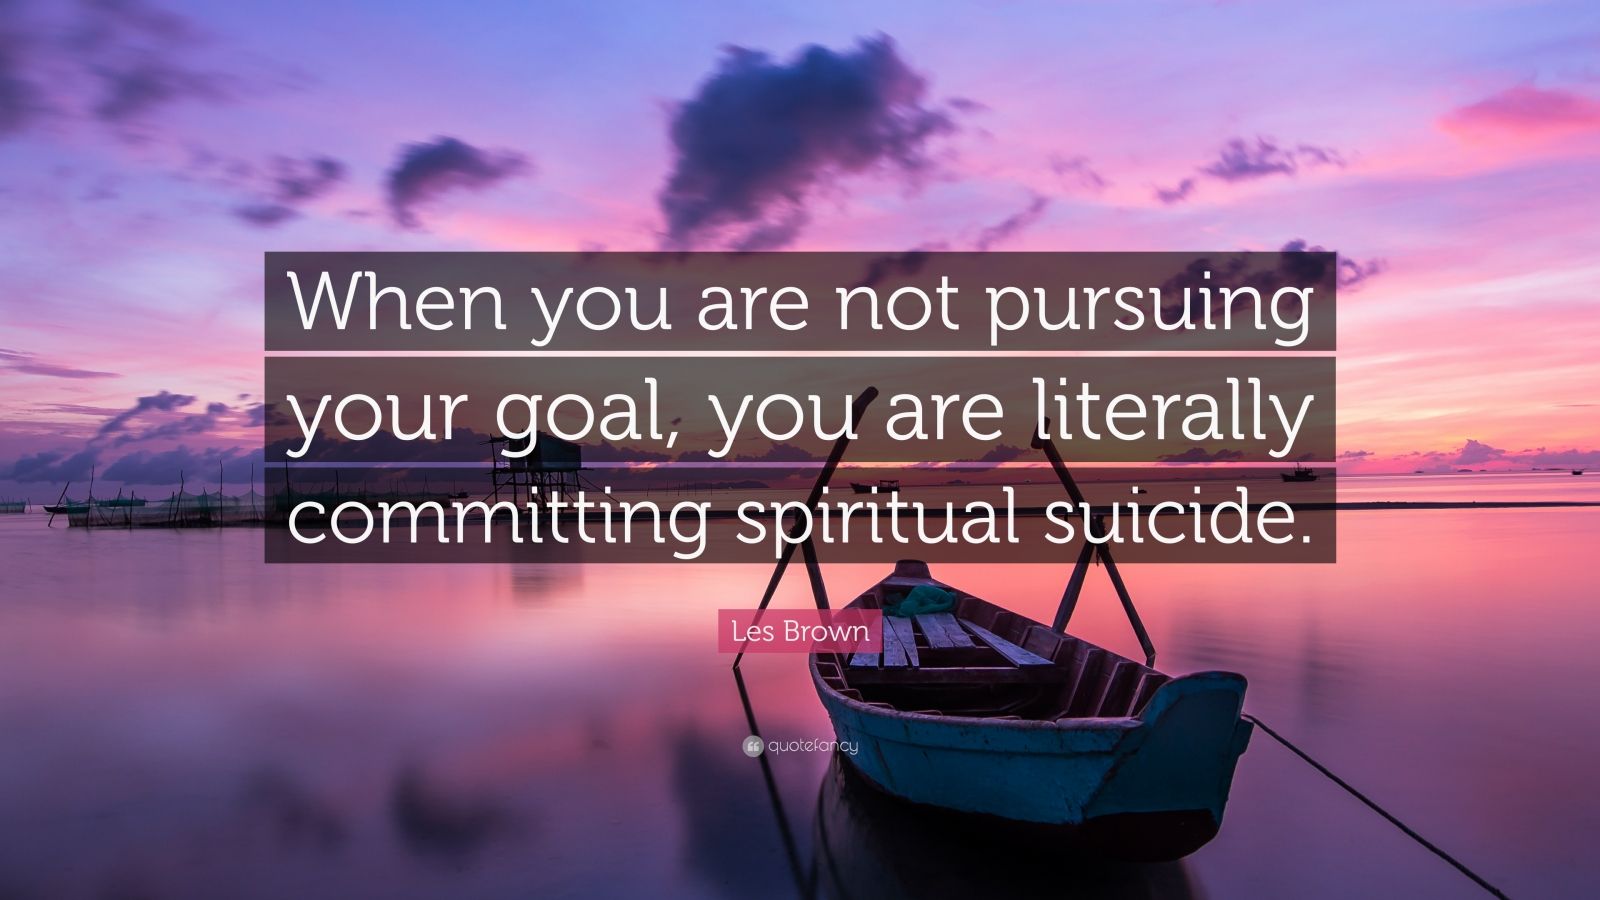 Les Brown Quote: “When you are not pursuing your goal, you are